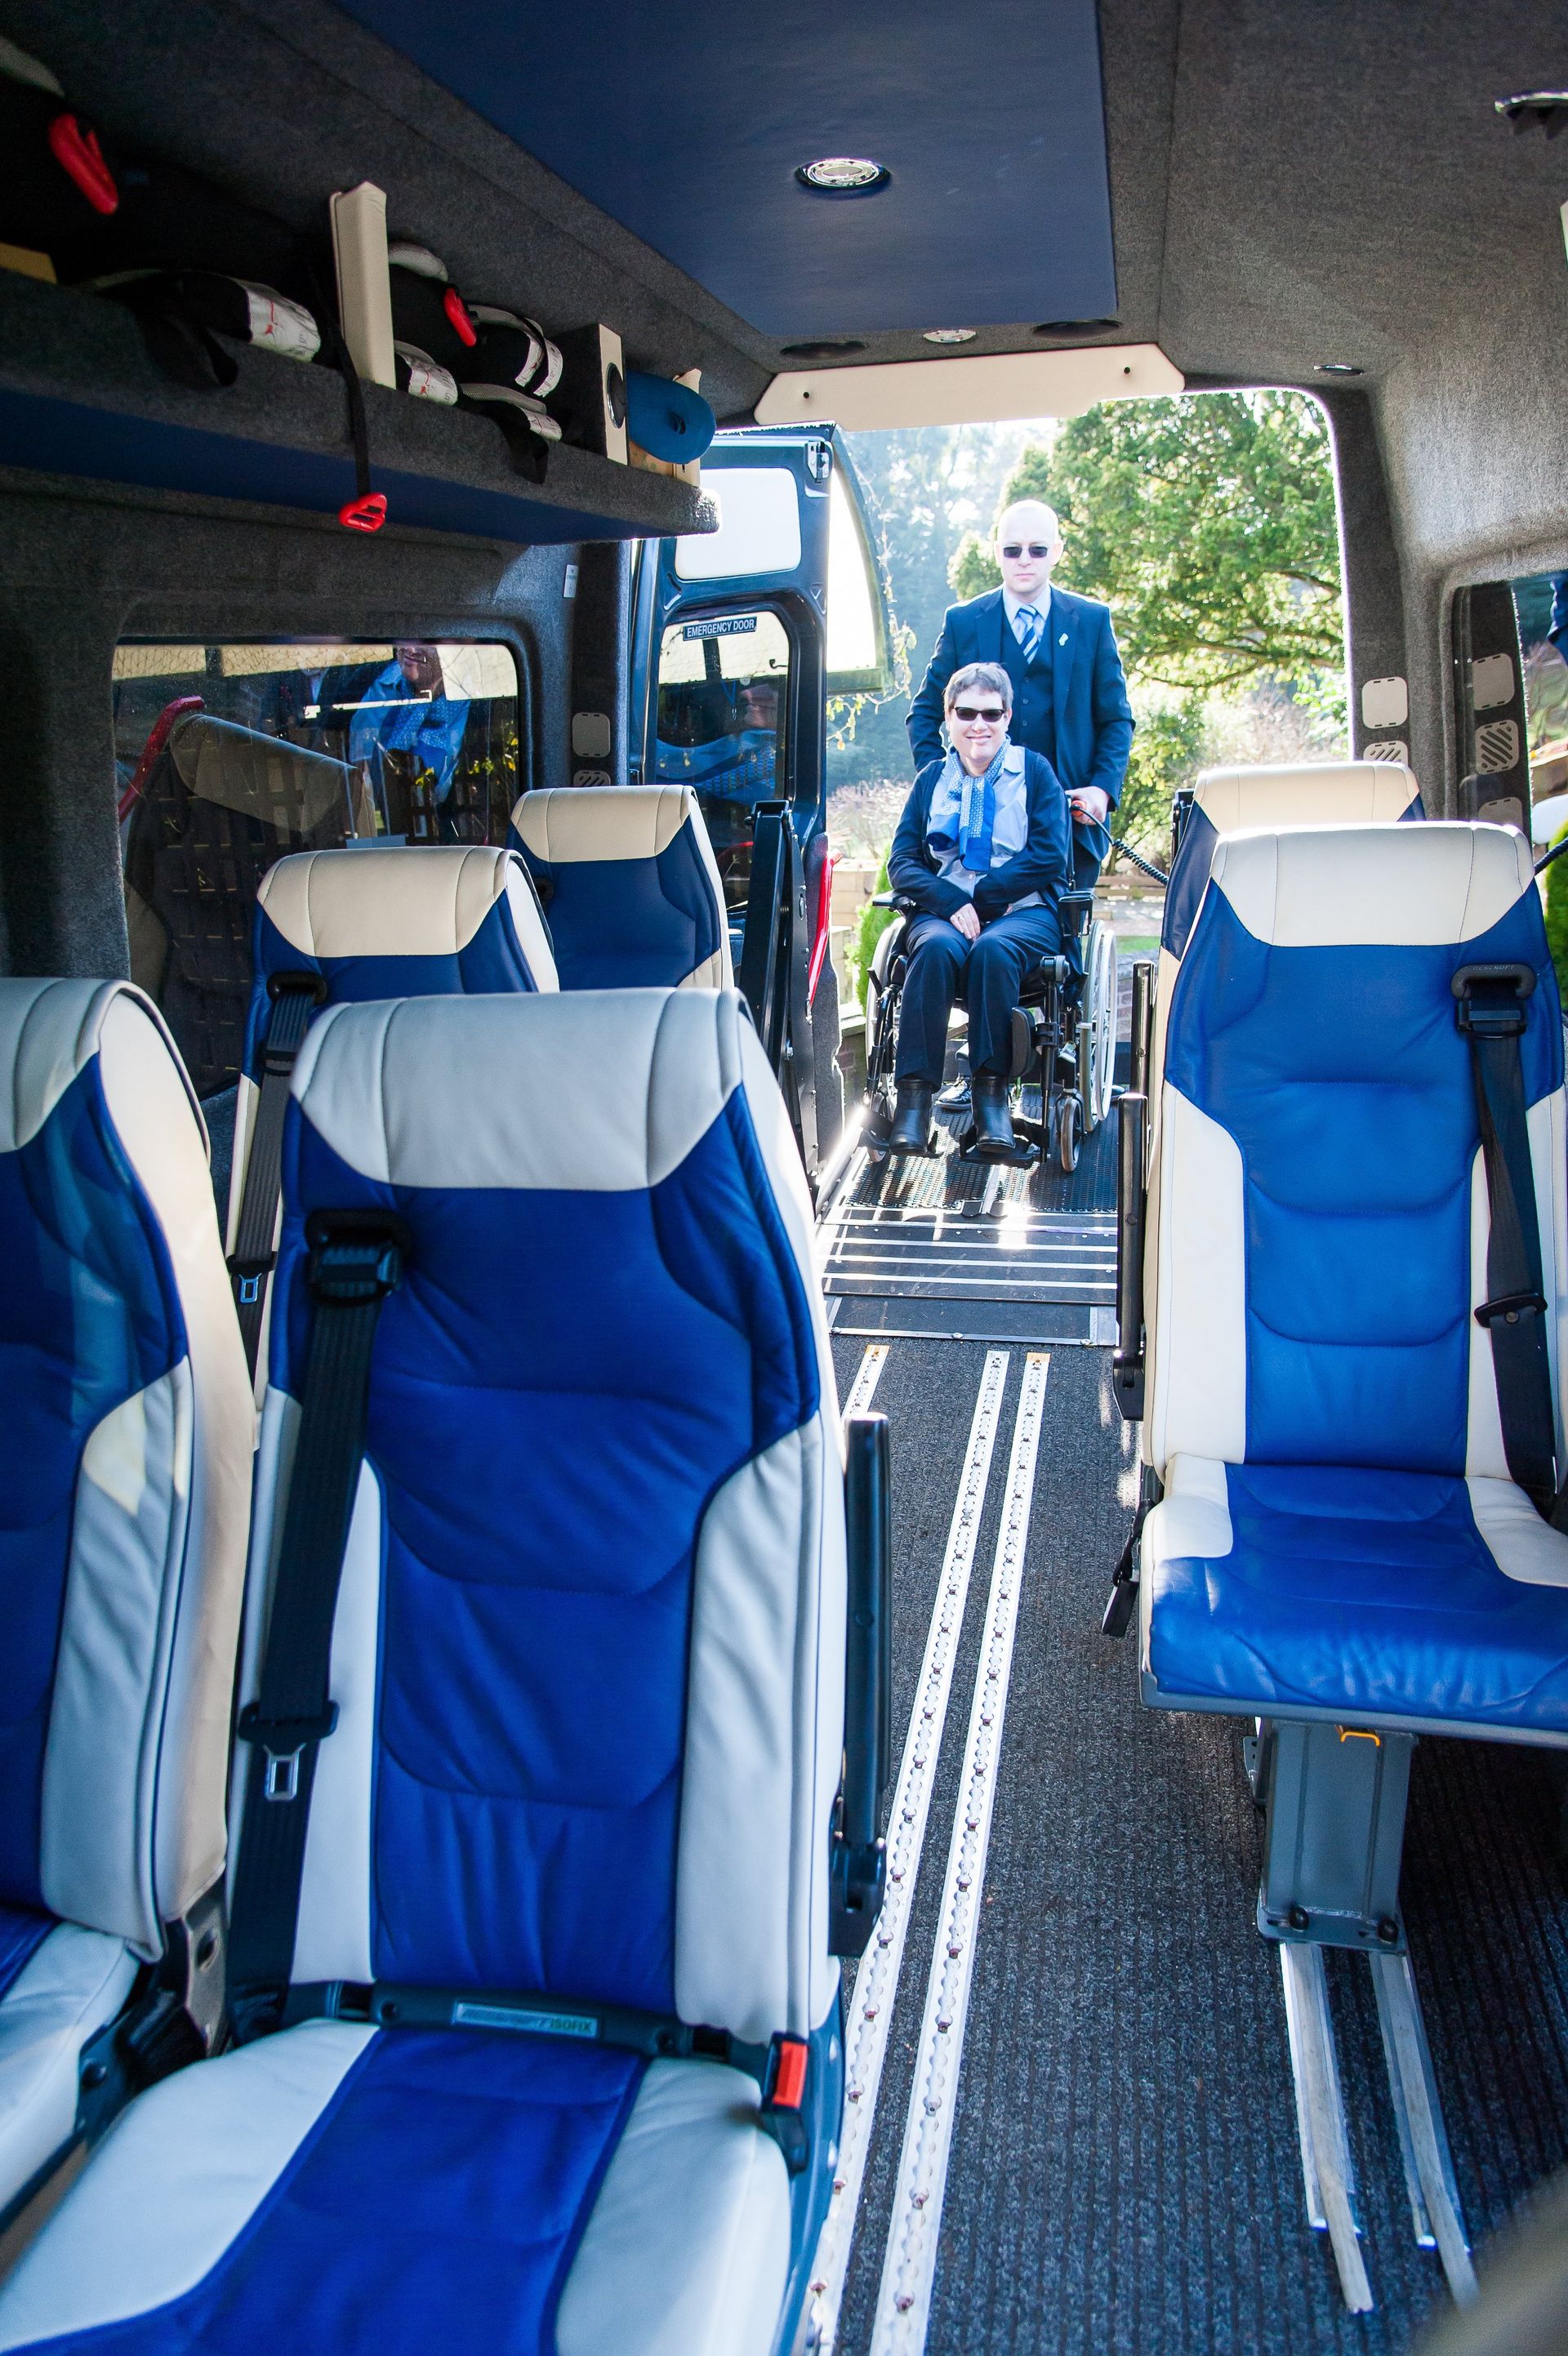 inside of accessible minibus